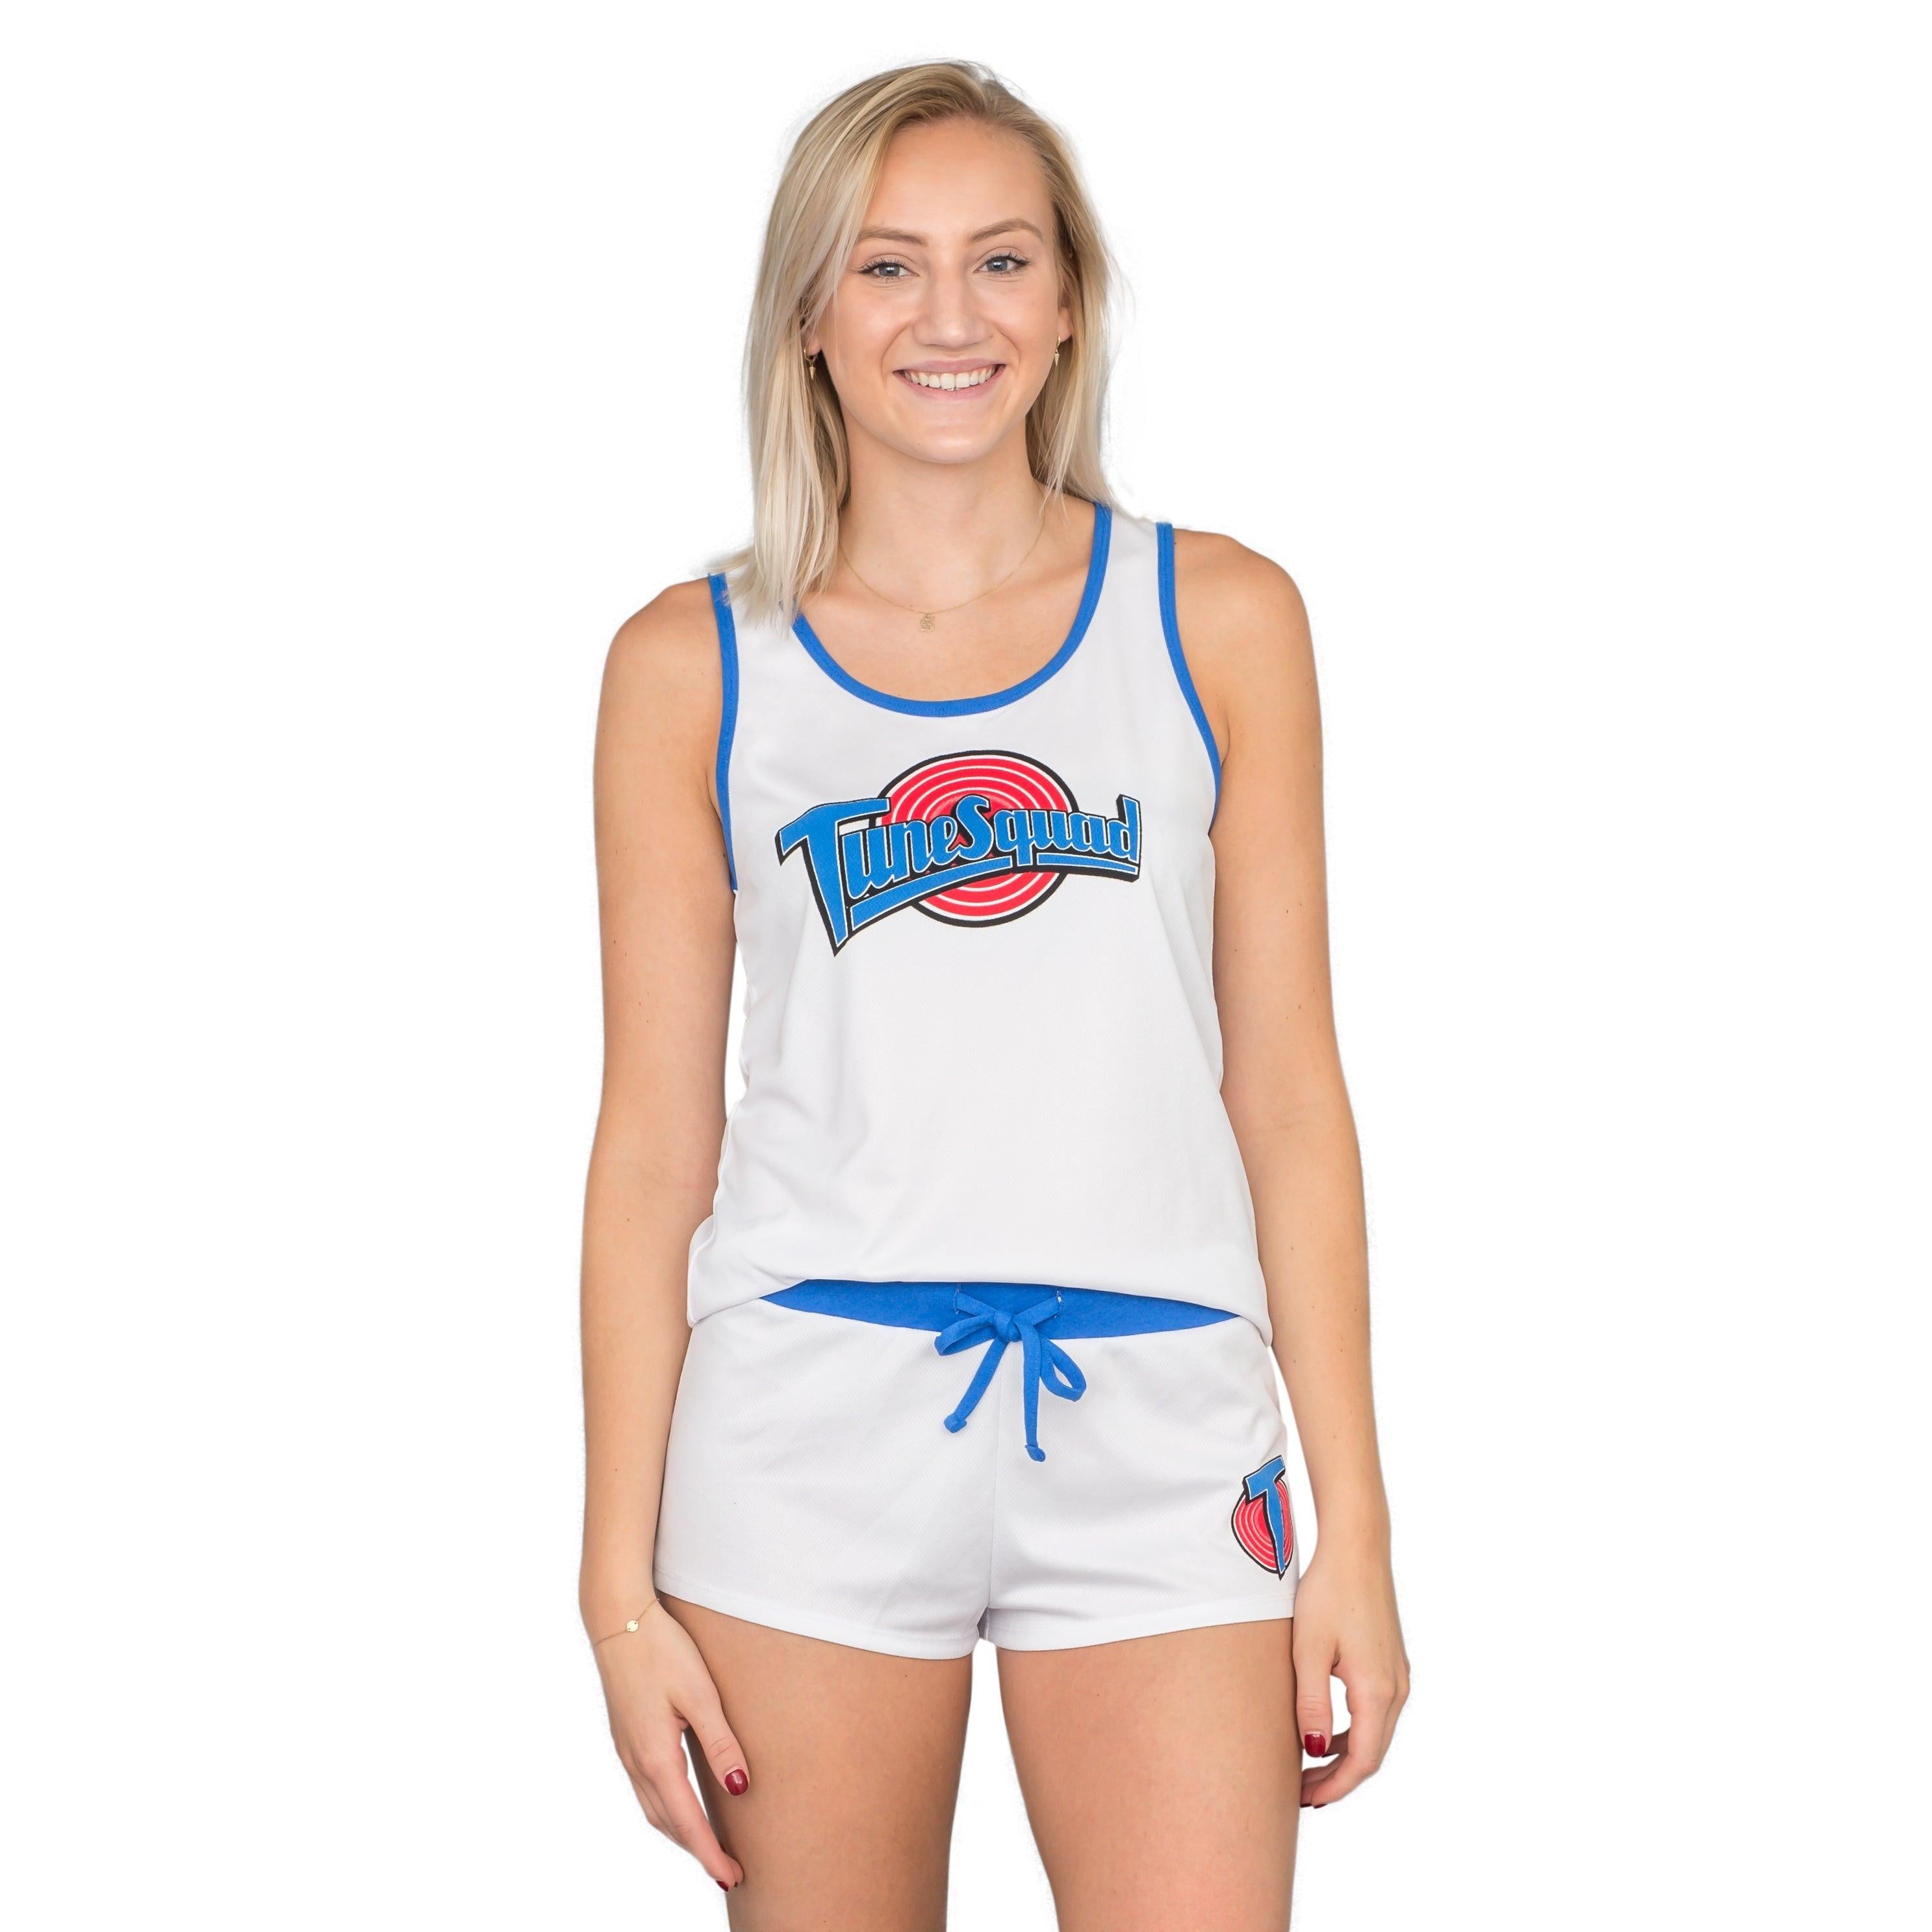 Space Jam Tune Squad Costume Top and Shorts Set - TVStoreOnline